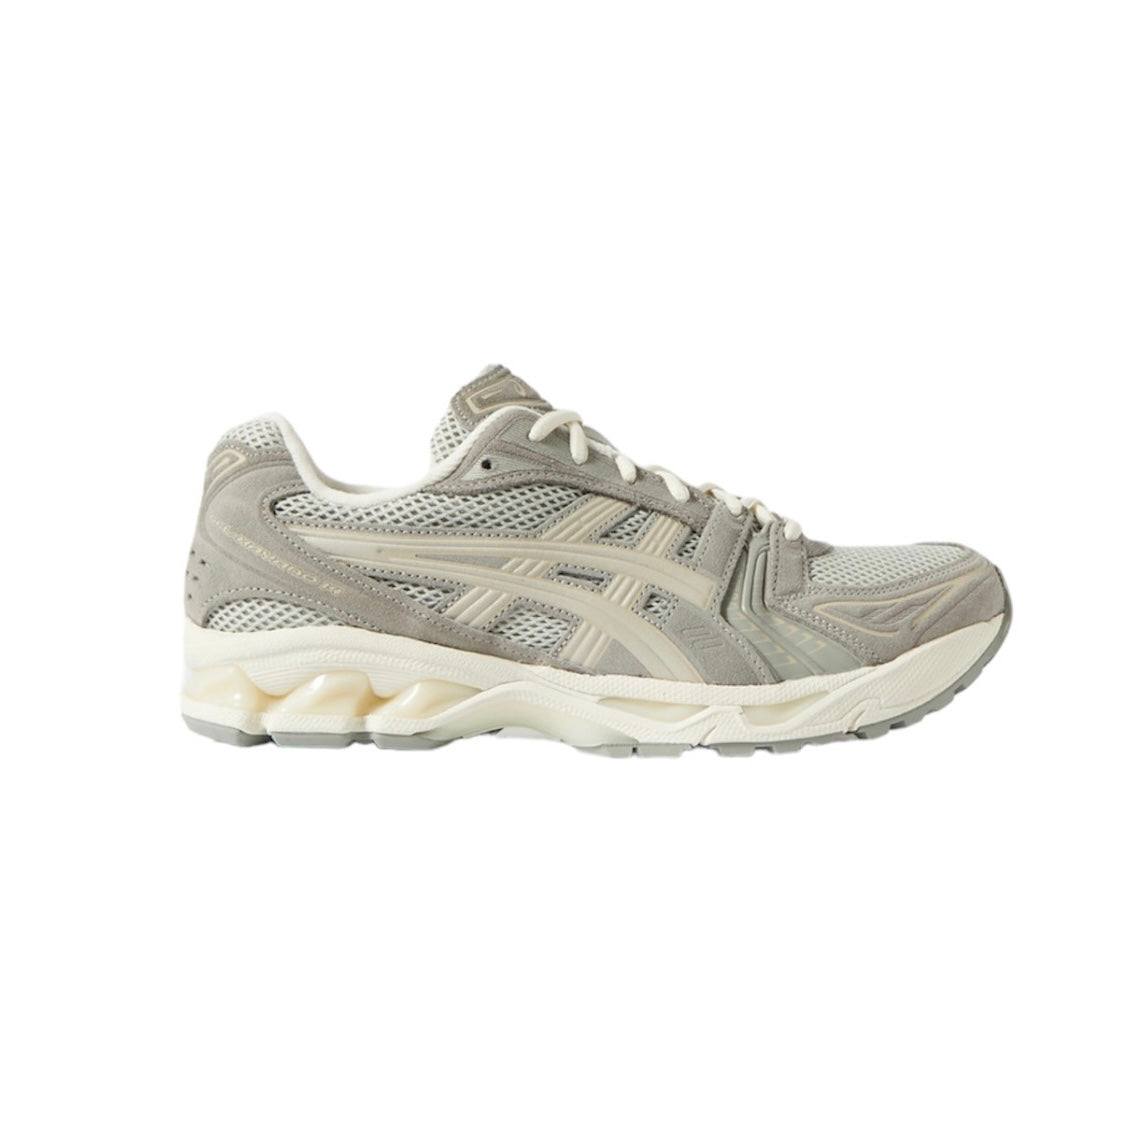 Asics GEL KAYANO 14 Suede and Leather - Gray